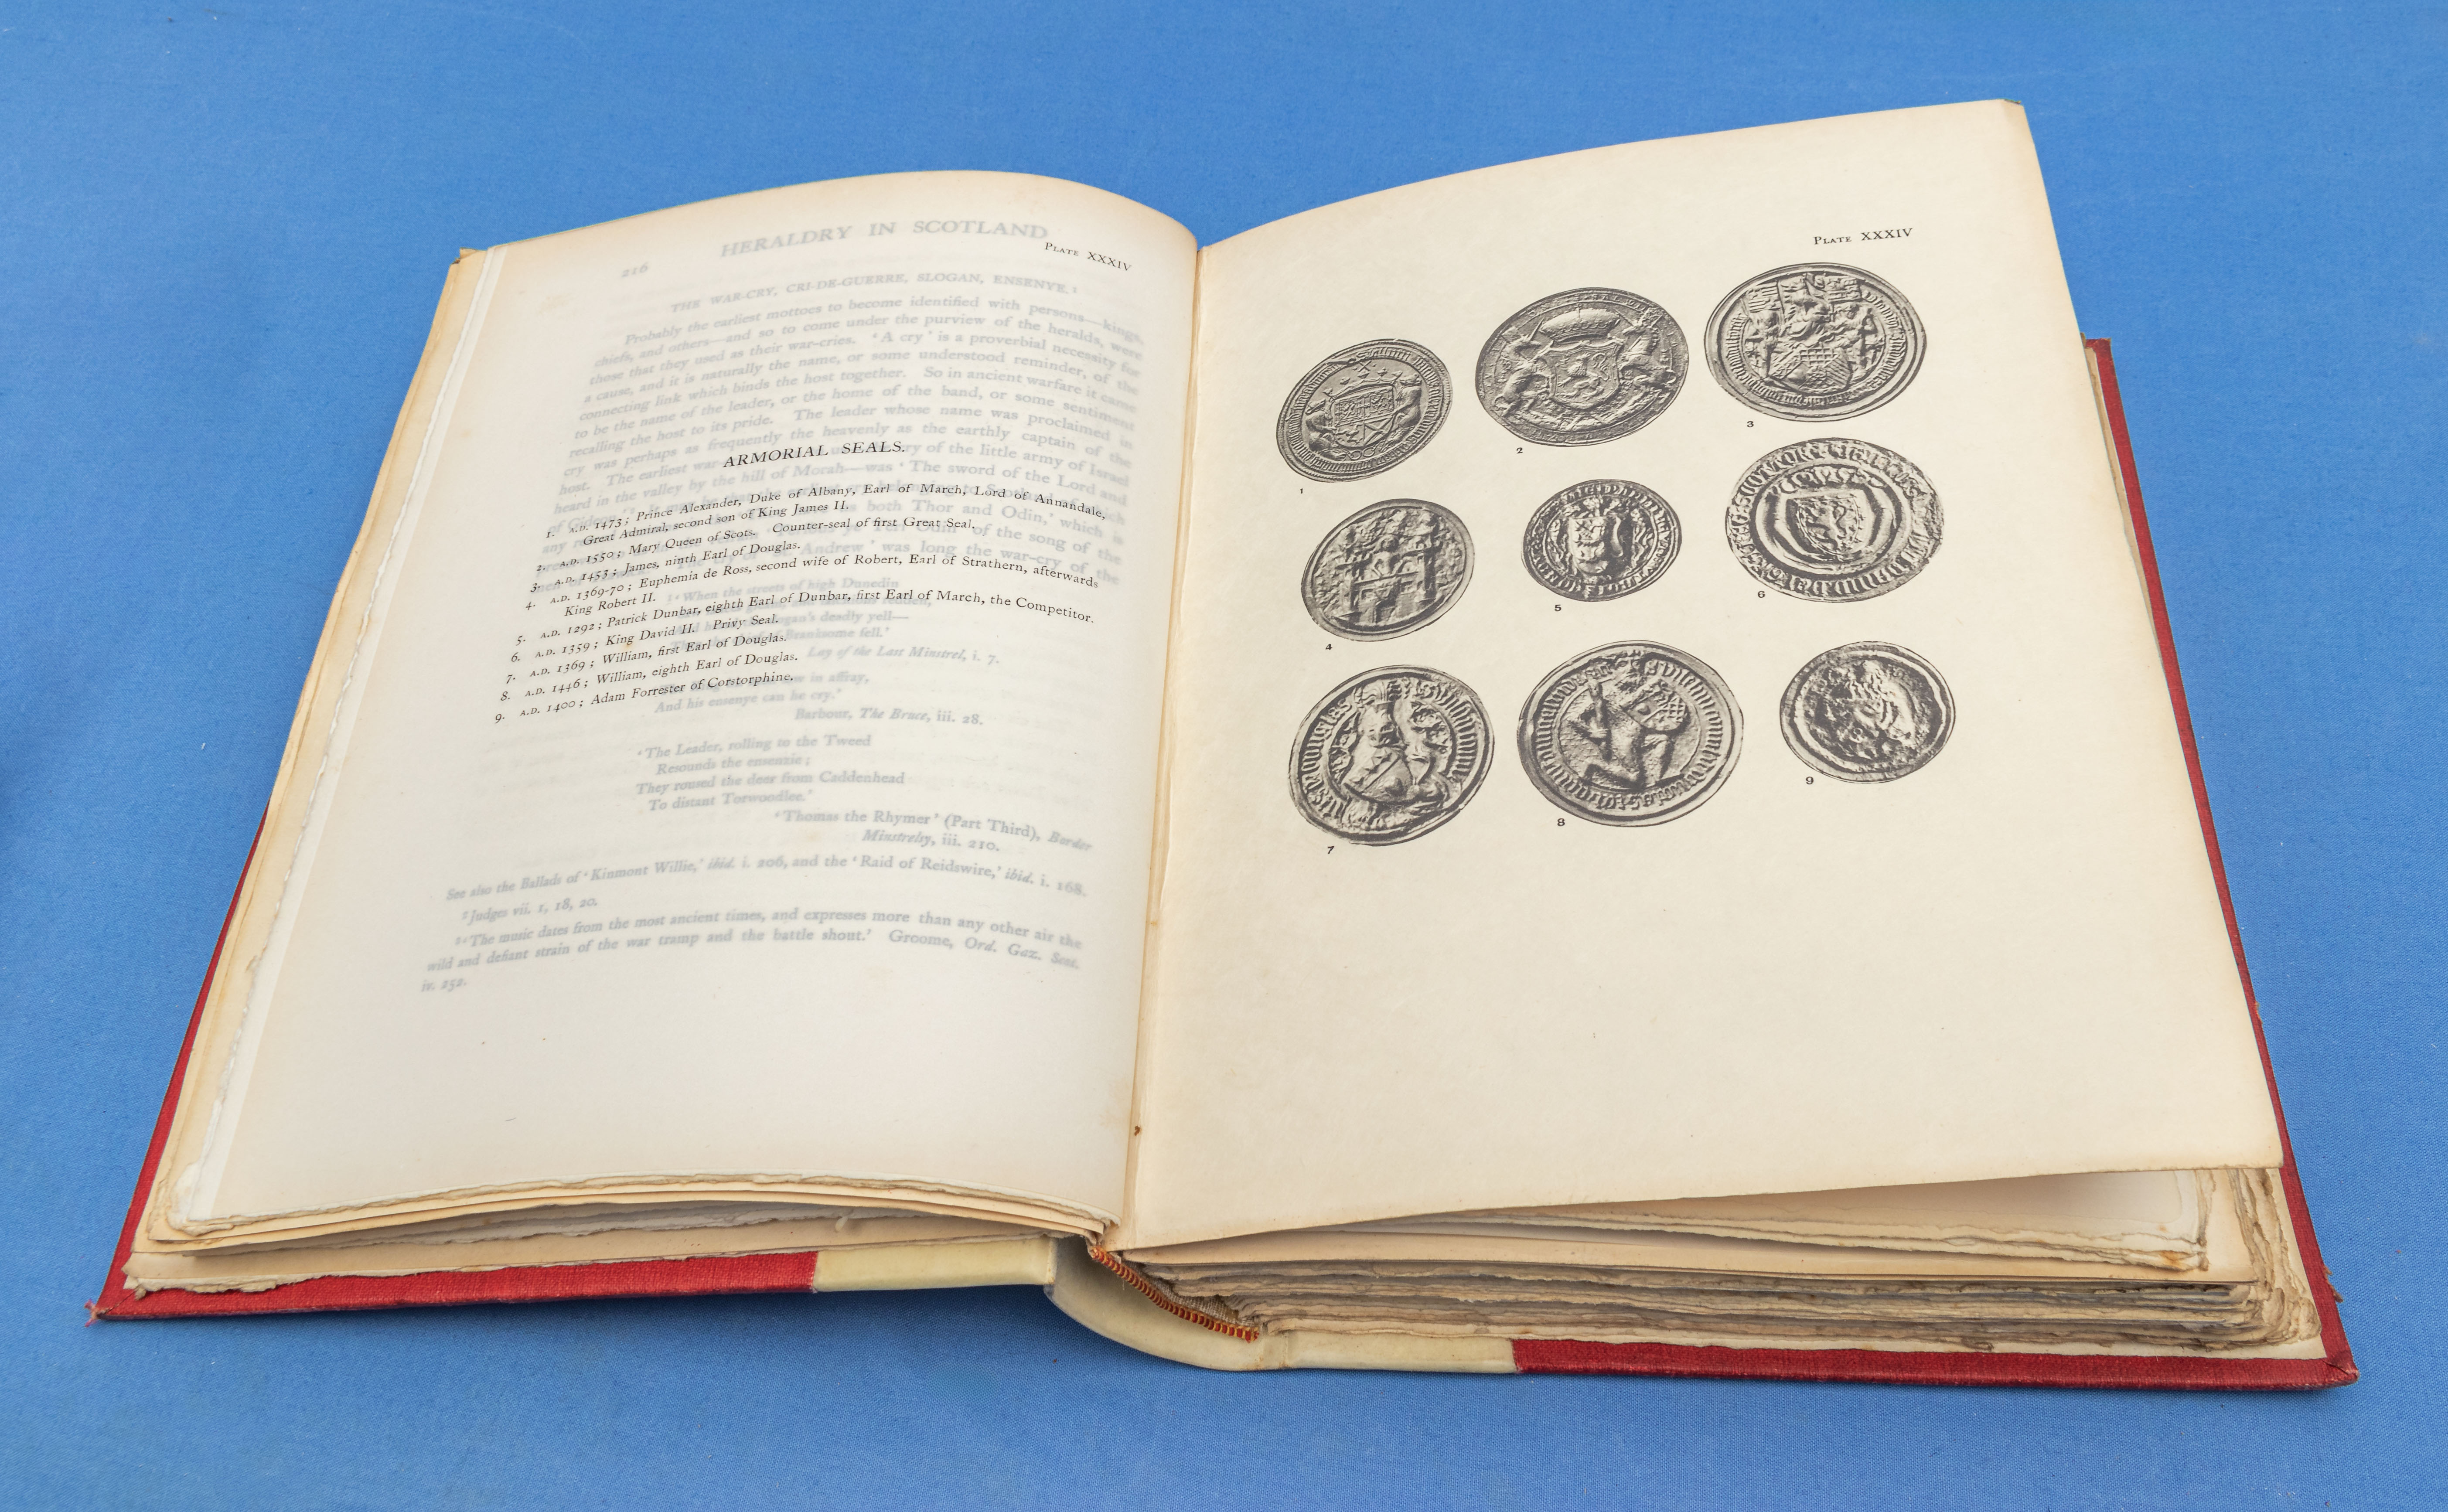 Heraldry in Scotland volumes I and II by J H Stevenson published by James Maclehose and Sons Glasgow - Image 9 of 11